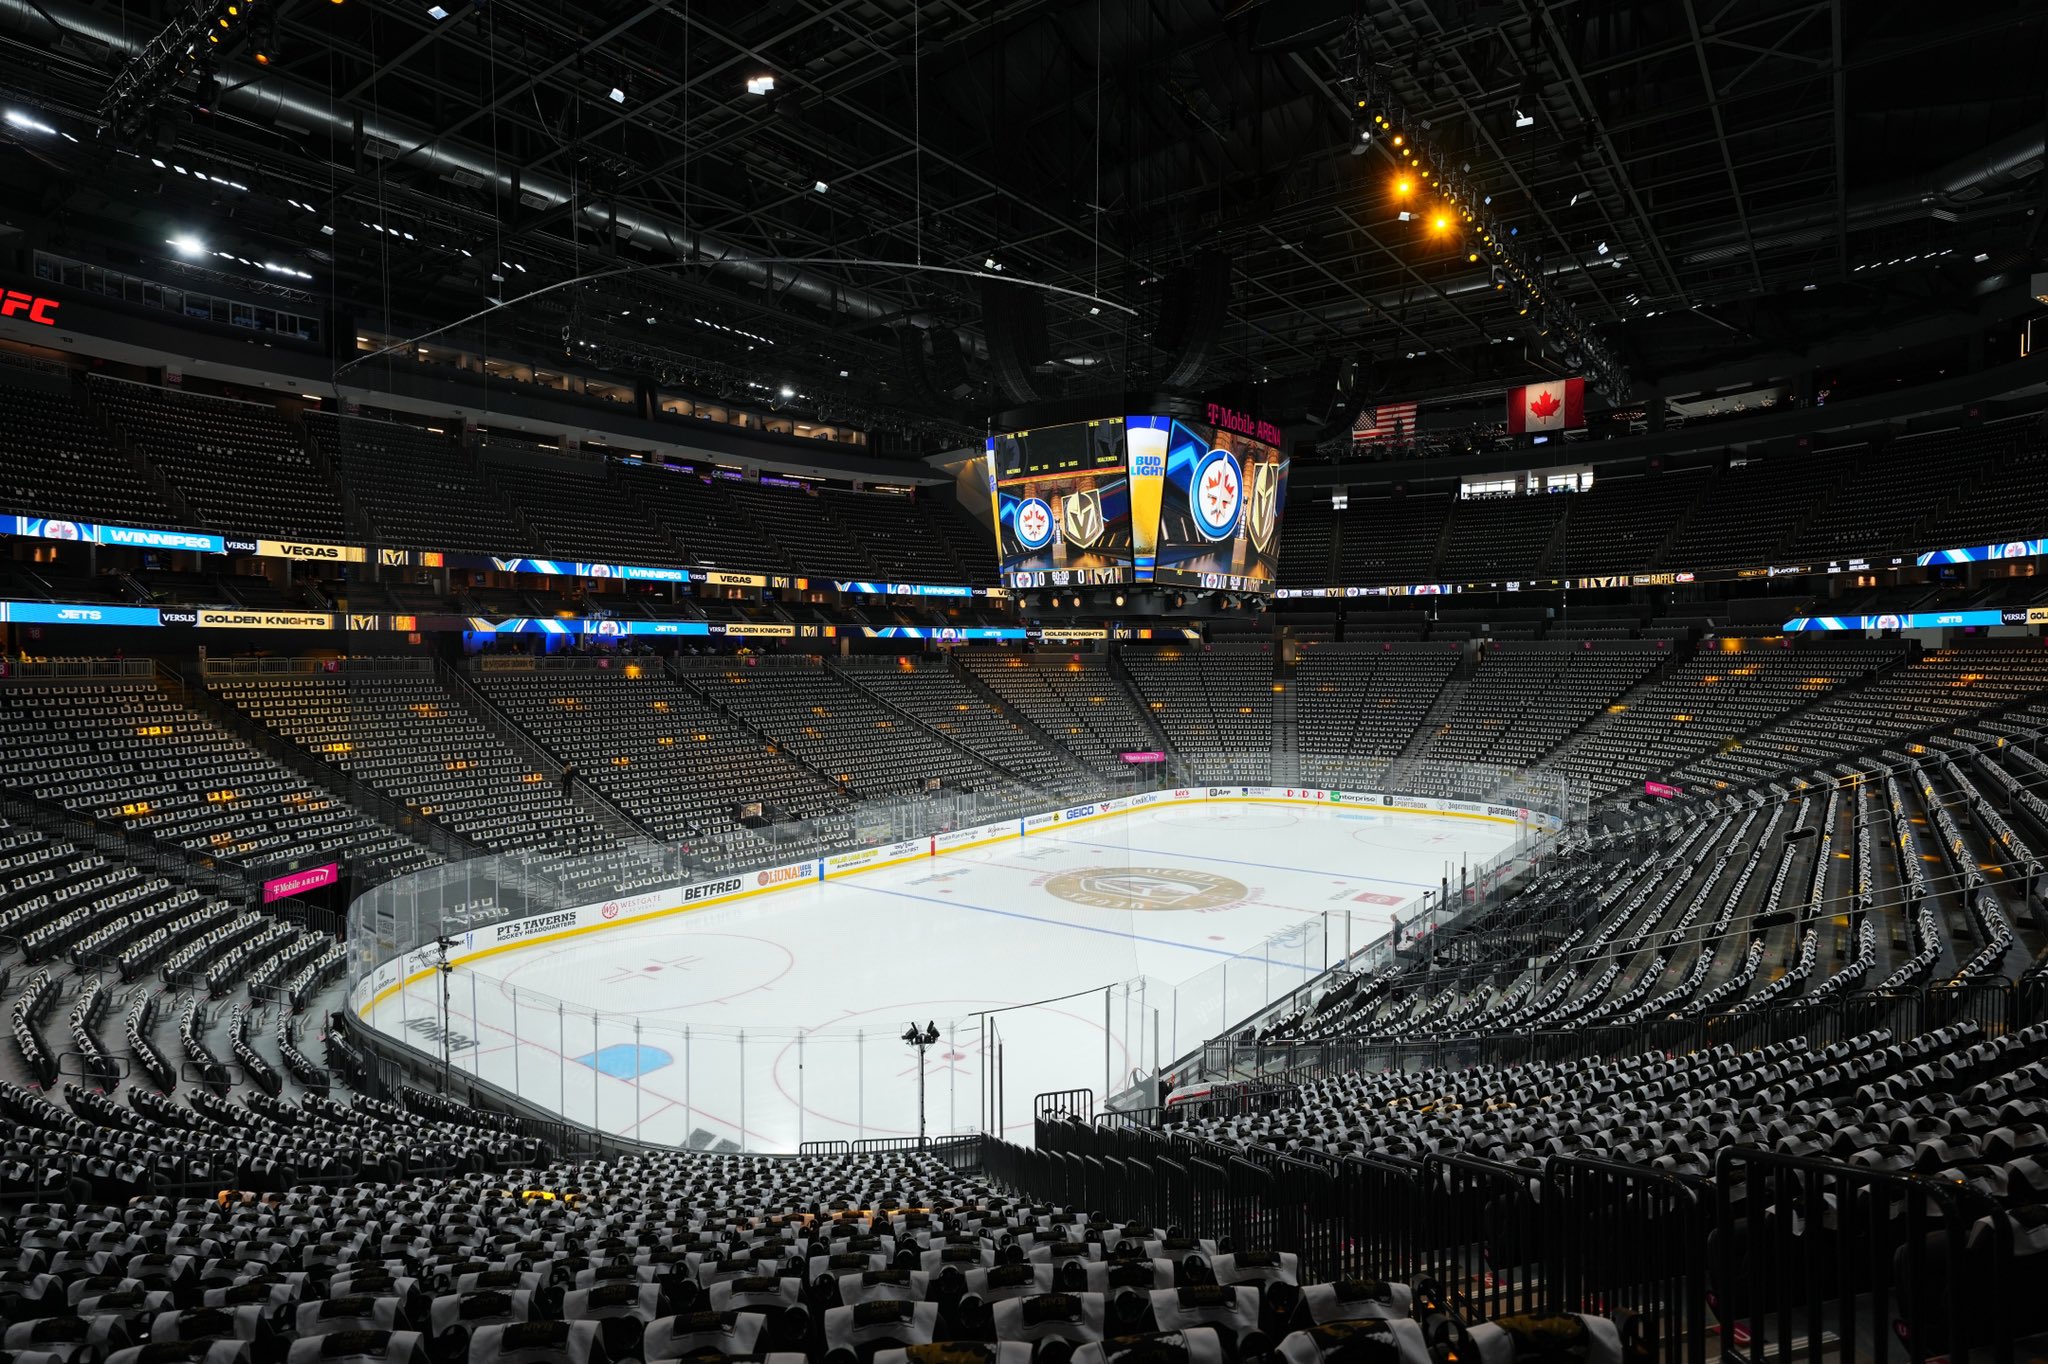 T-Mobile Arena - All You Need to Know BEFORE You Go (with Photos)